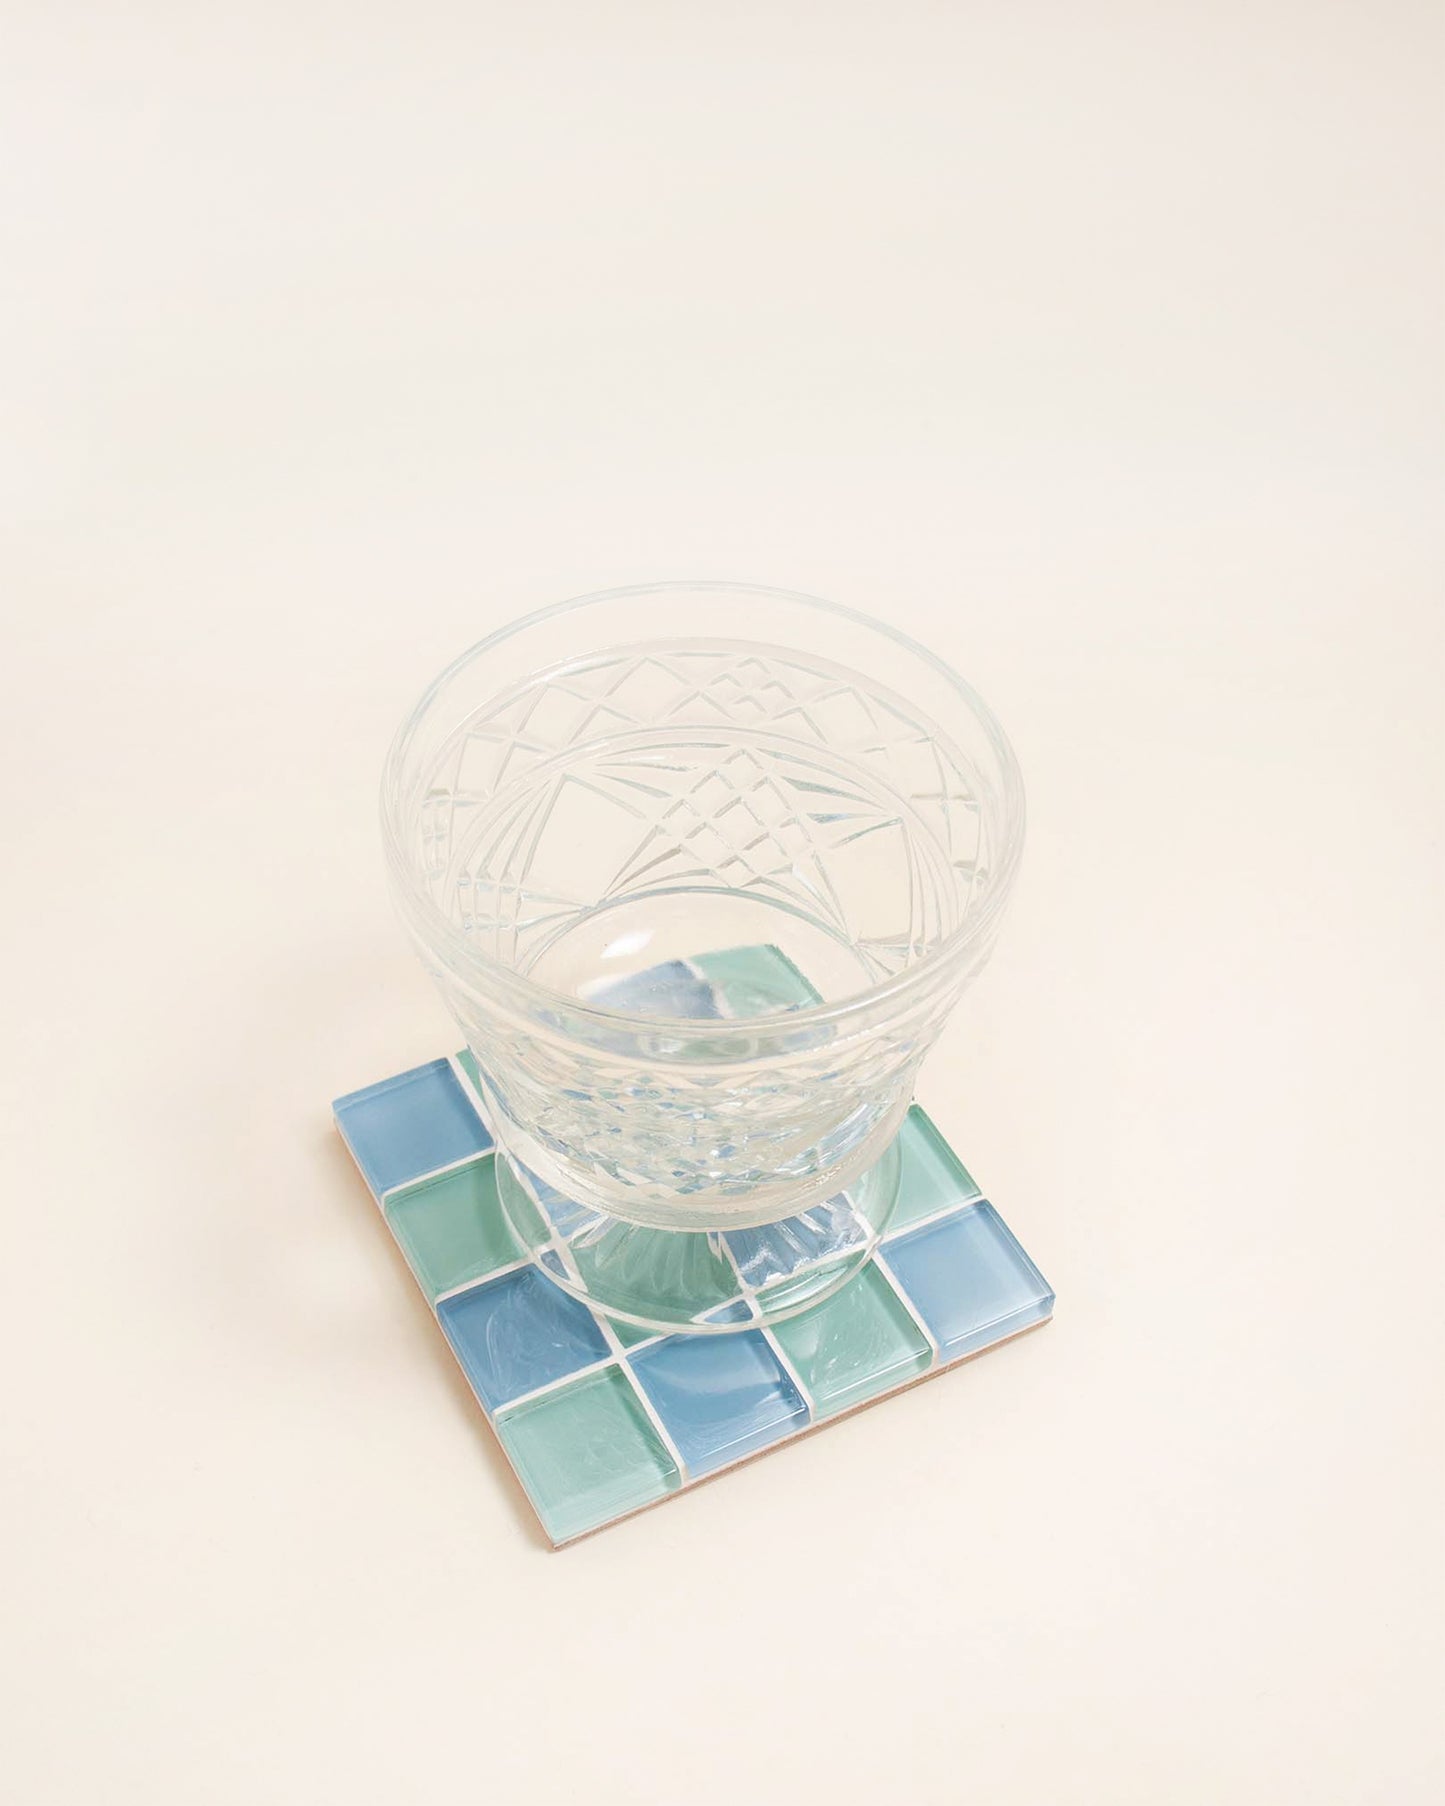 Handcrafted coasters made with high quality glass tiles. They don't just have to be a coaster though, use them for whatever your heart desires honestly. They're just dreamy little pops of color for your space! 